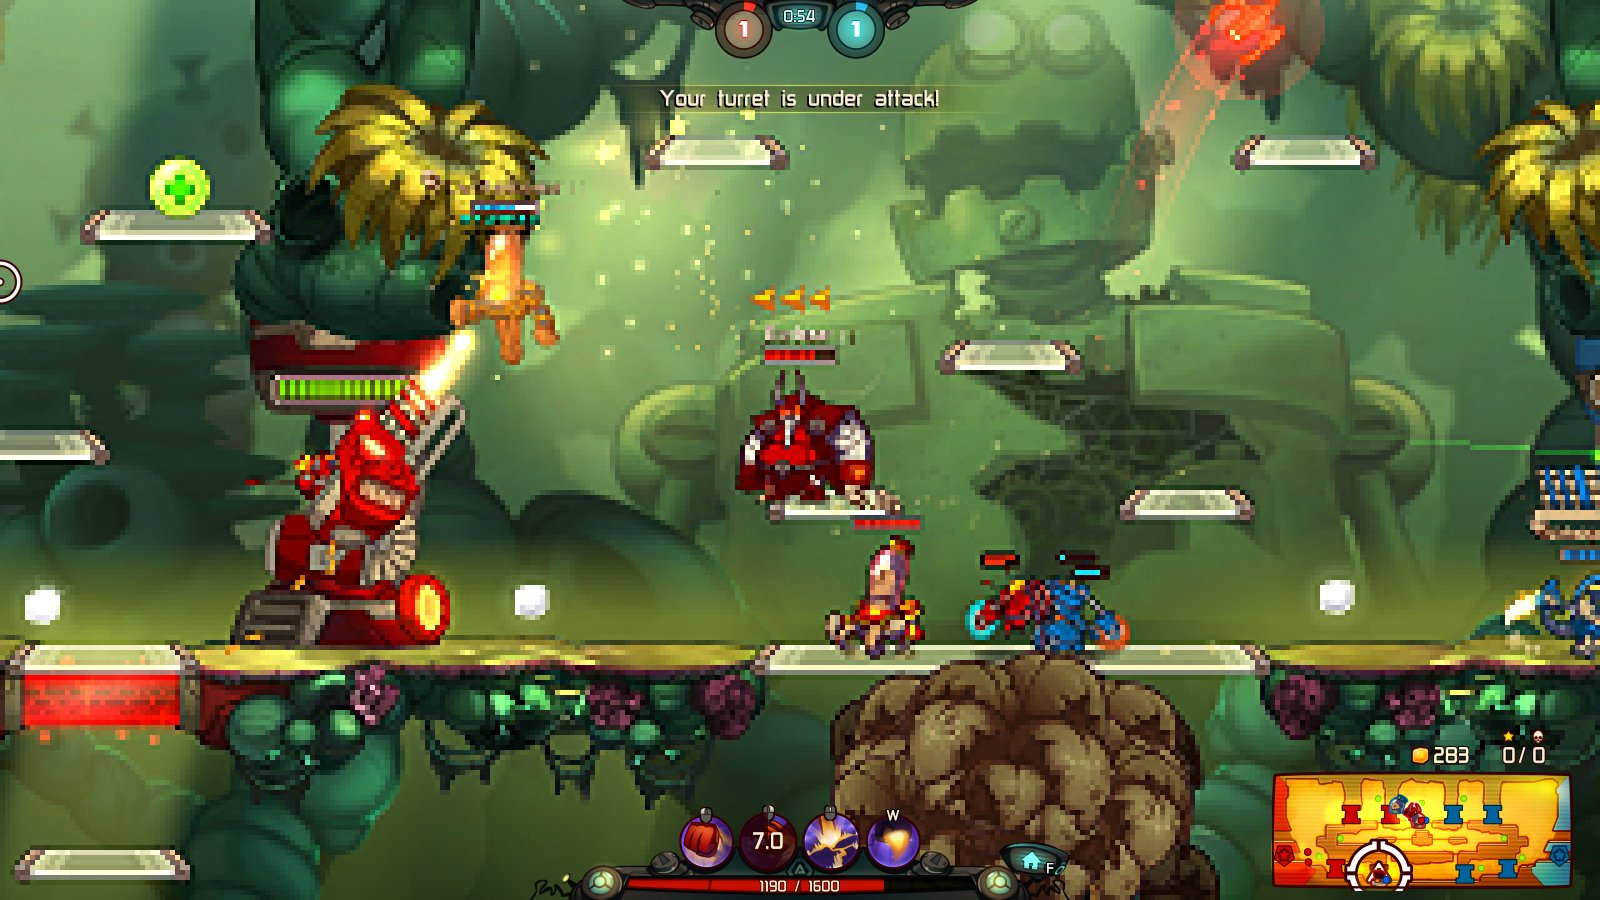 Awesomenauts Backgrounds, Compatible - PC, Mobile, Gadgets| 1600x900 px